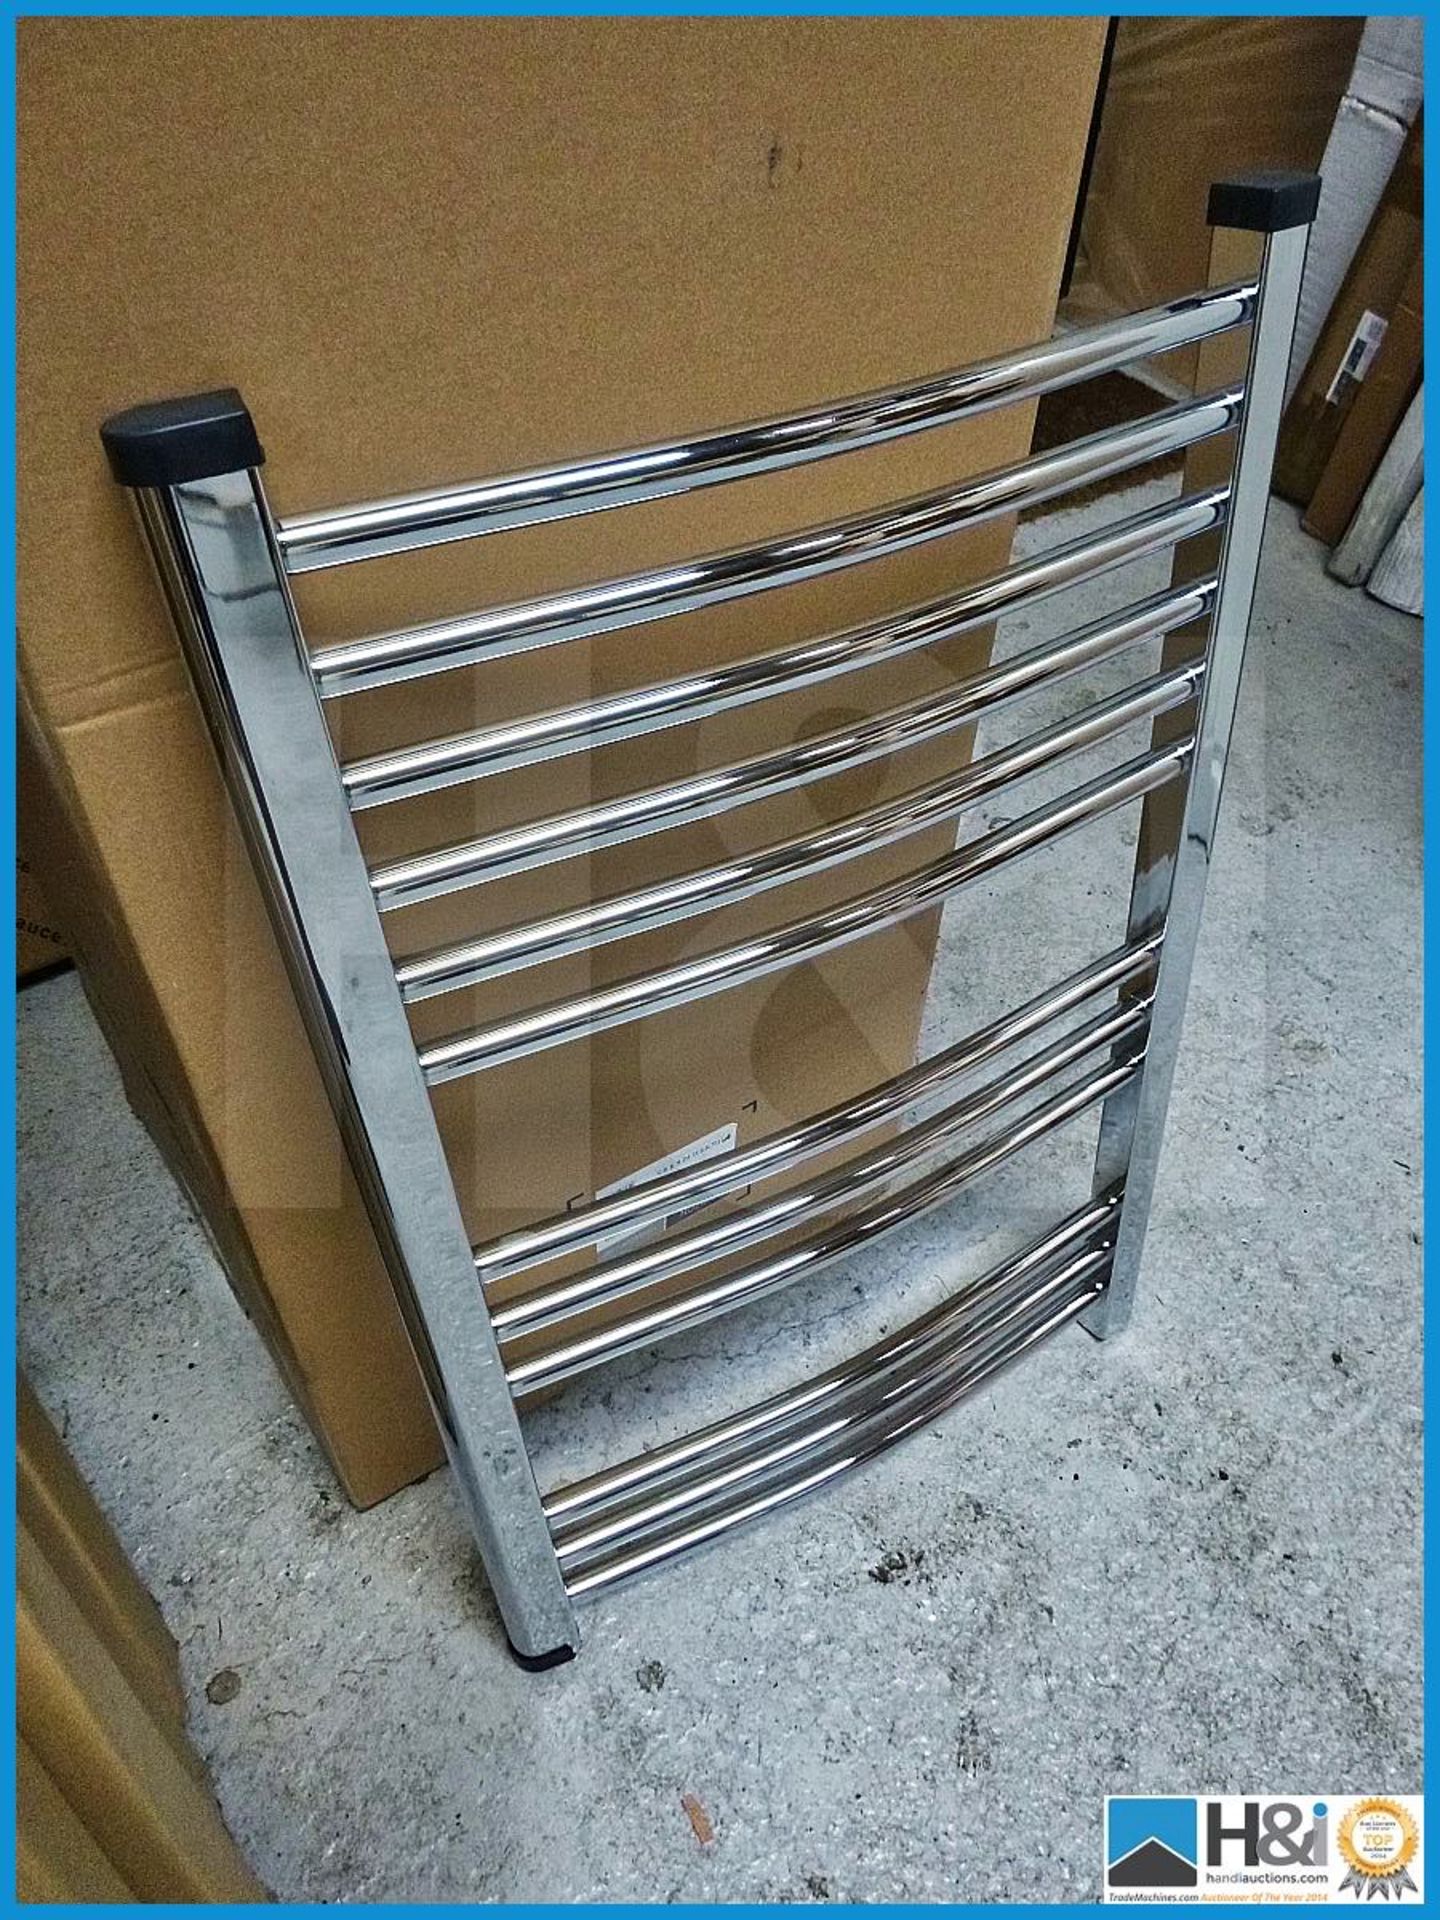 Chrome towel radiator 750X500mm Complete with fittings RRP 129 GBP - Image 2 of 5